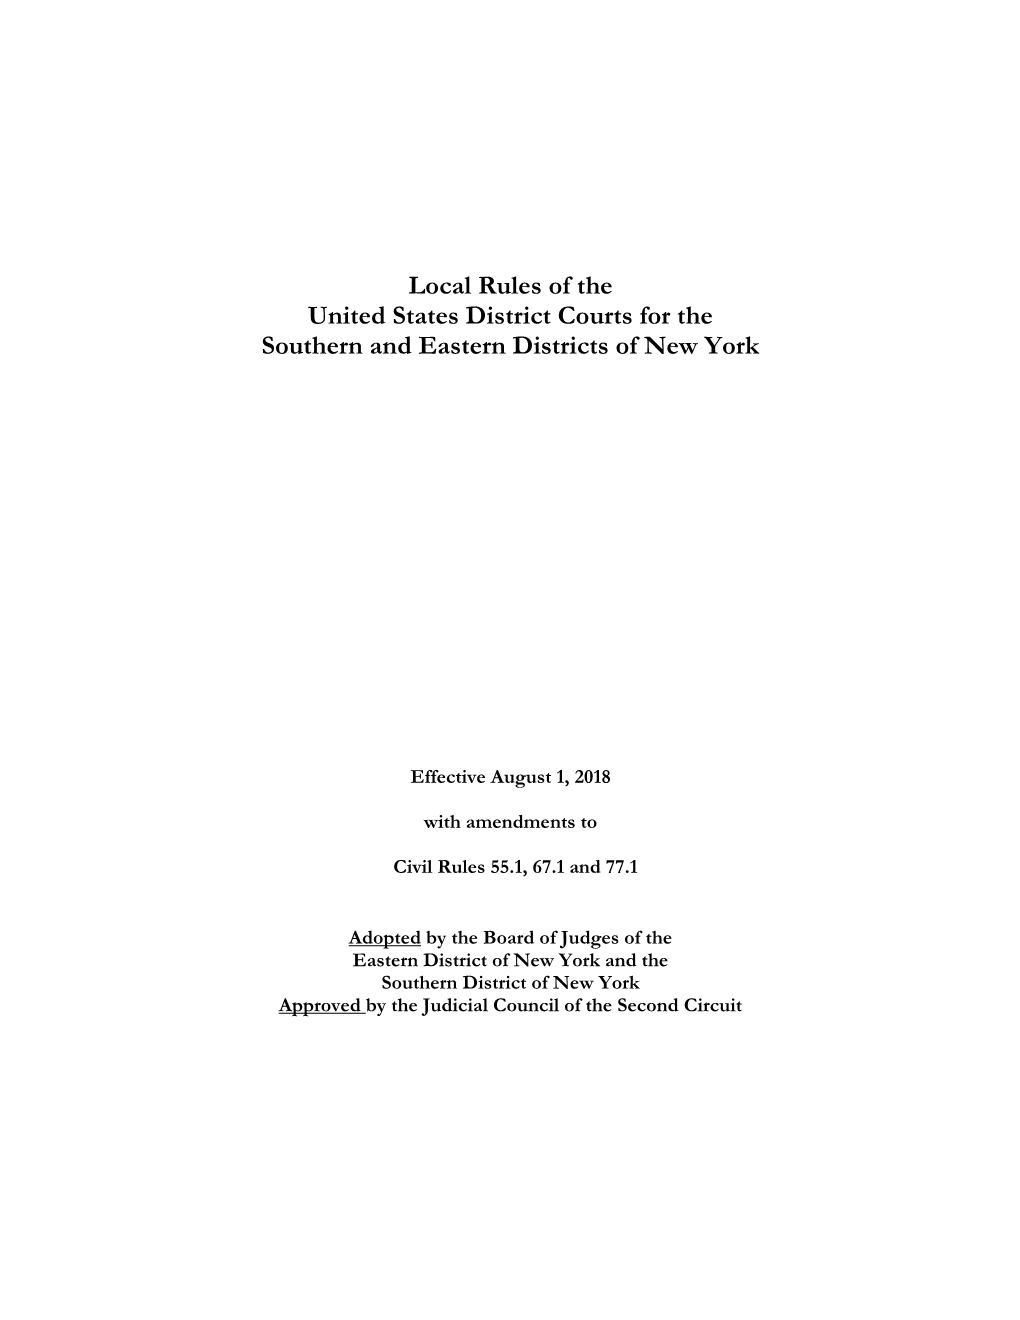 Local Rules of the United States District Courts for the Southern and Eastern Districts of New York